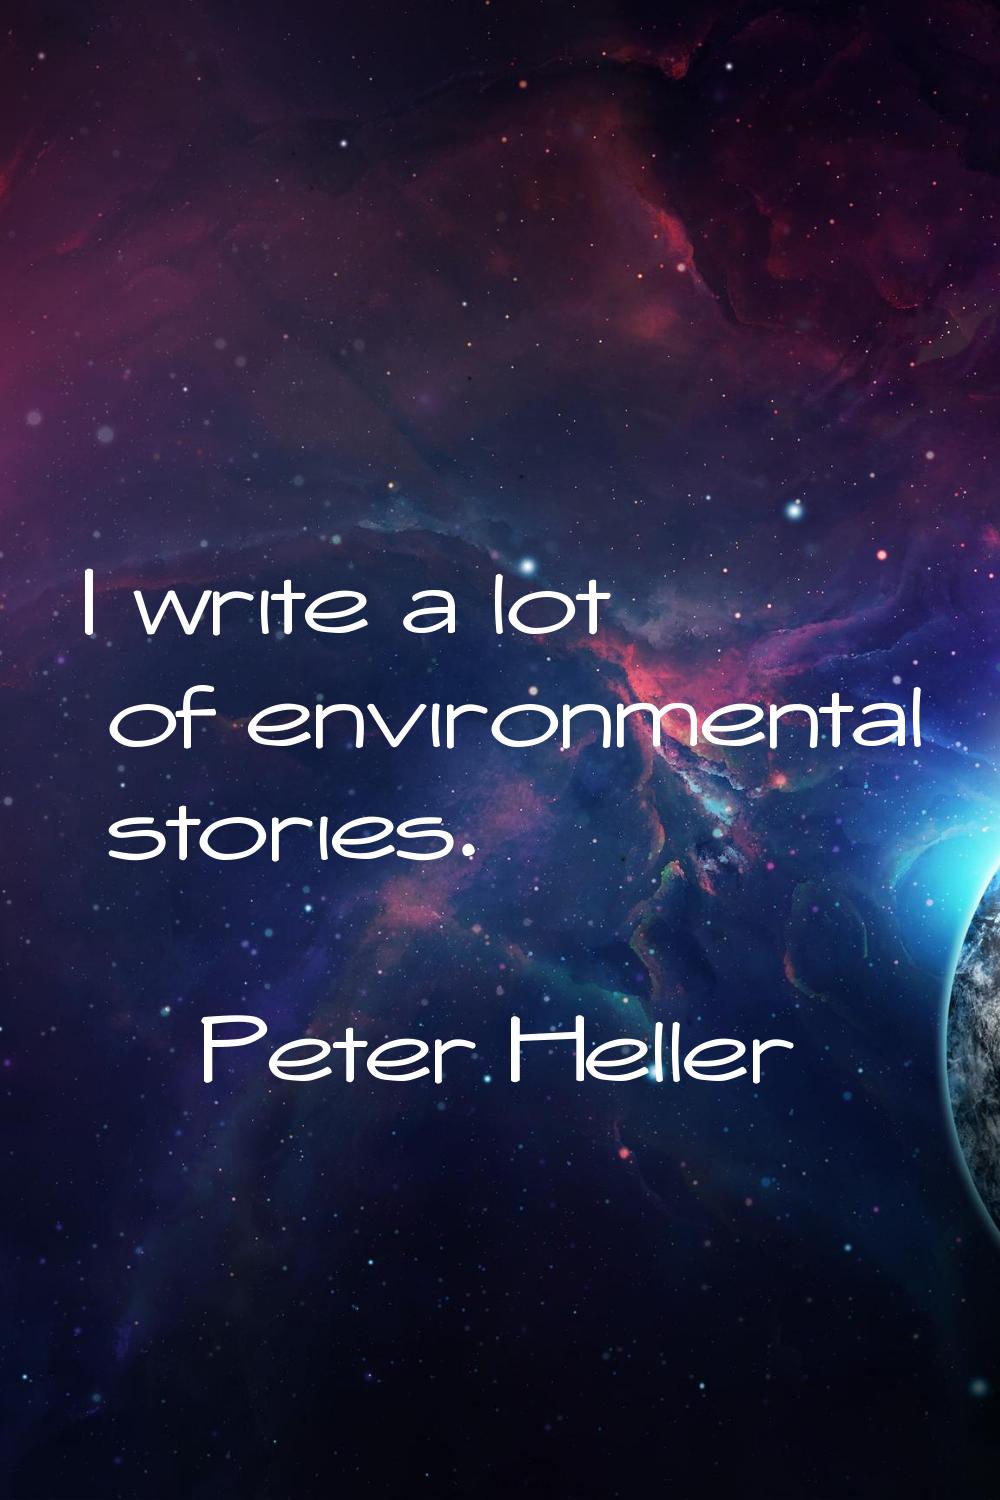 I write a lot of environmental stories.